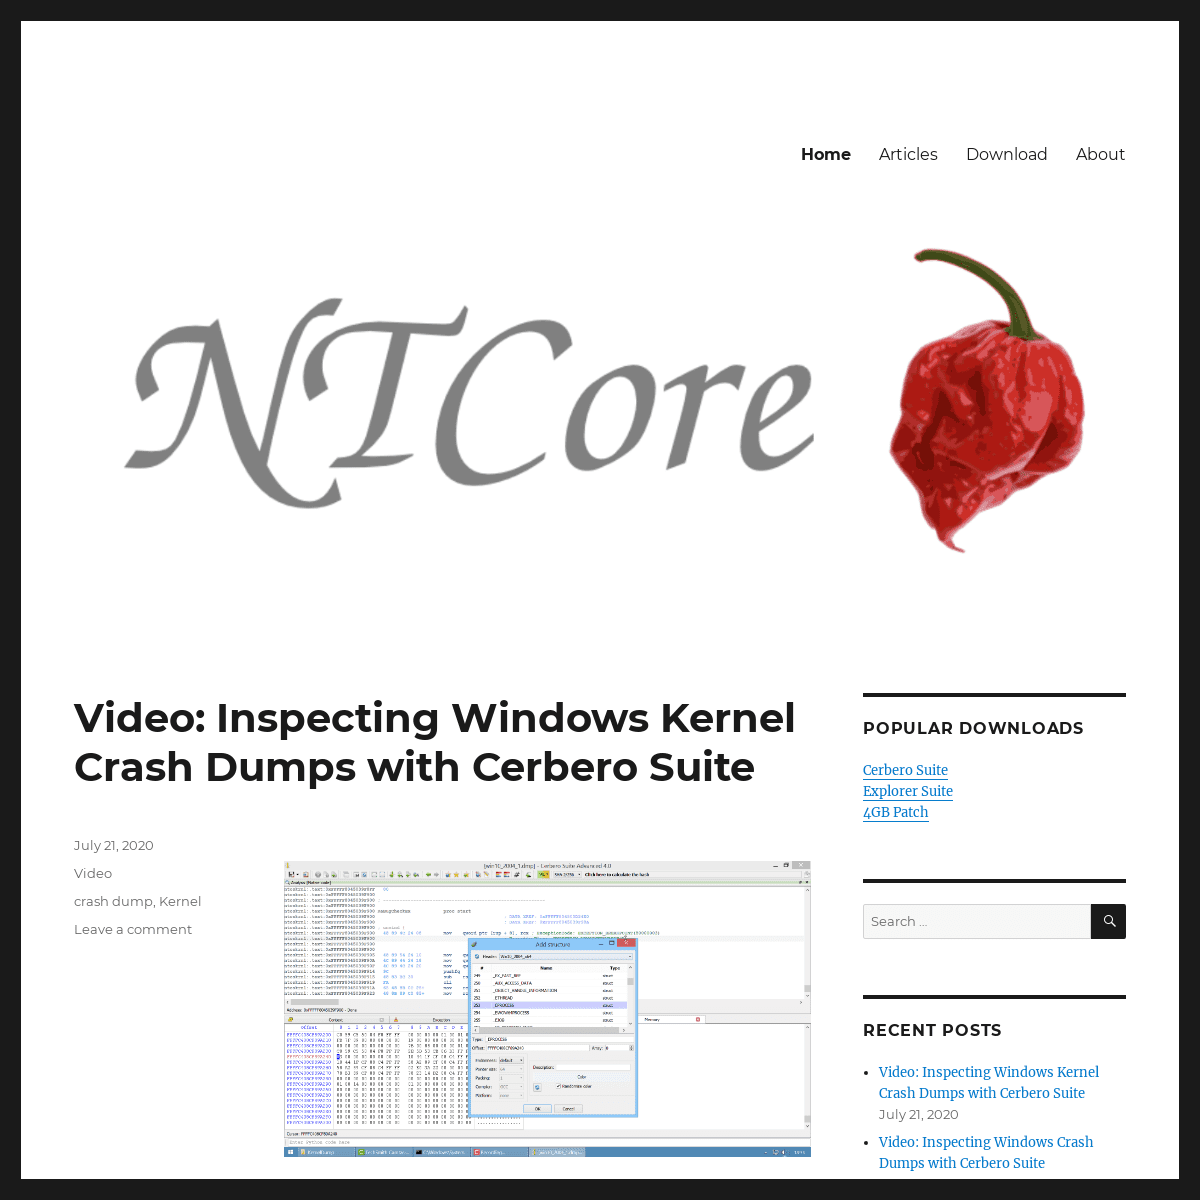 A complete backup of https://ntcore.com